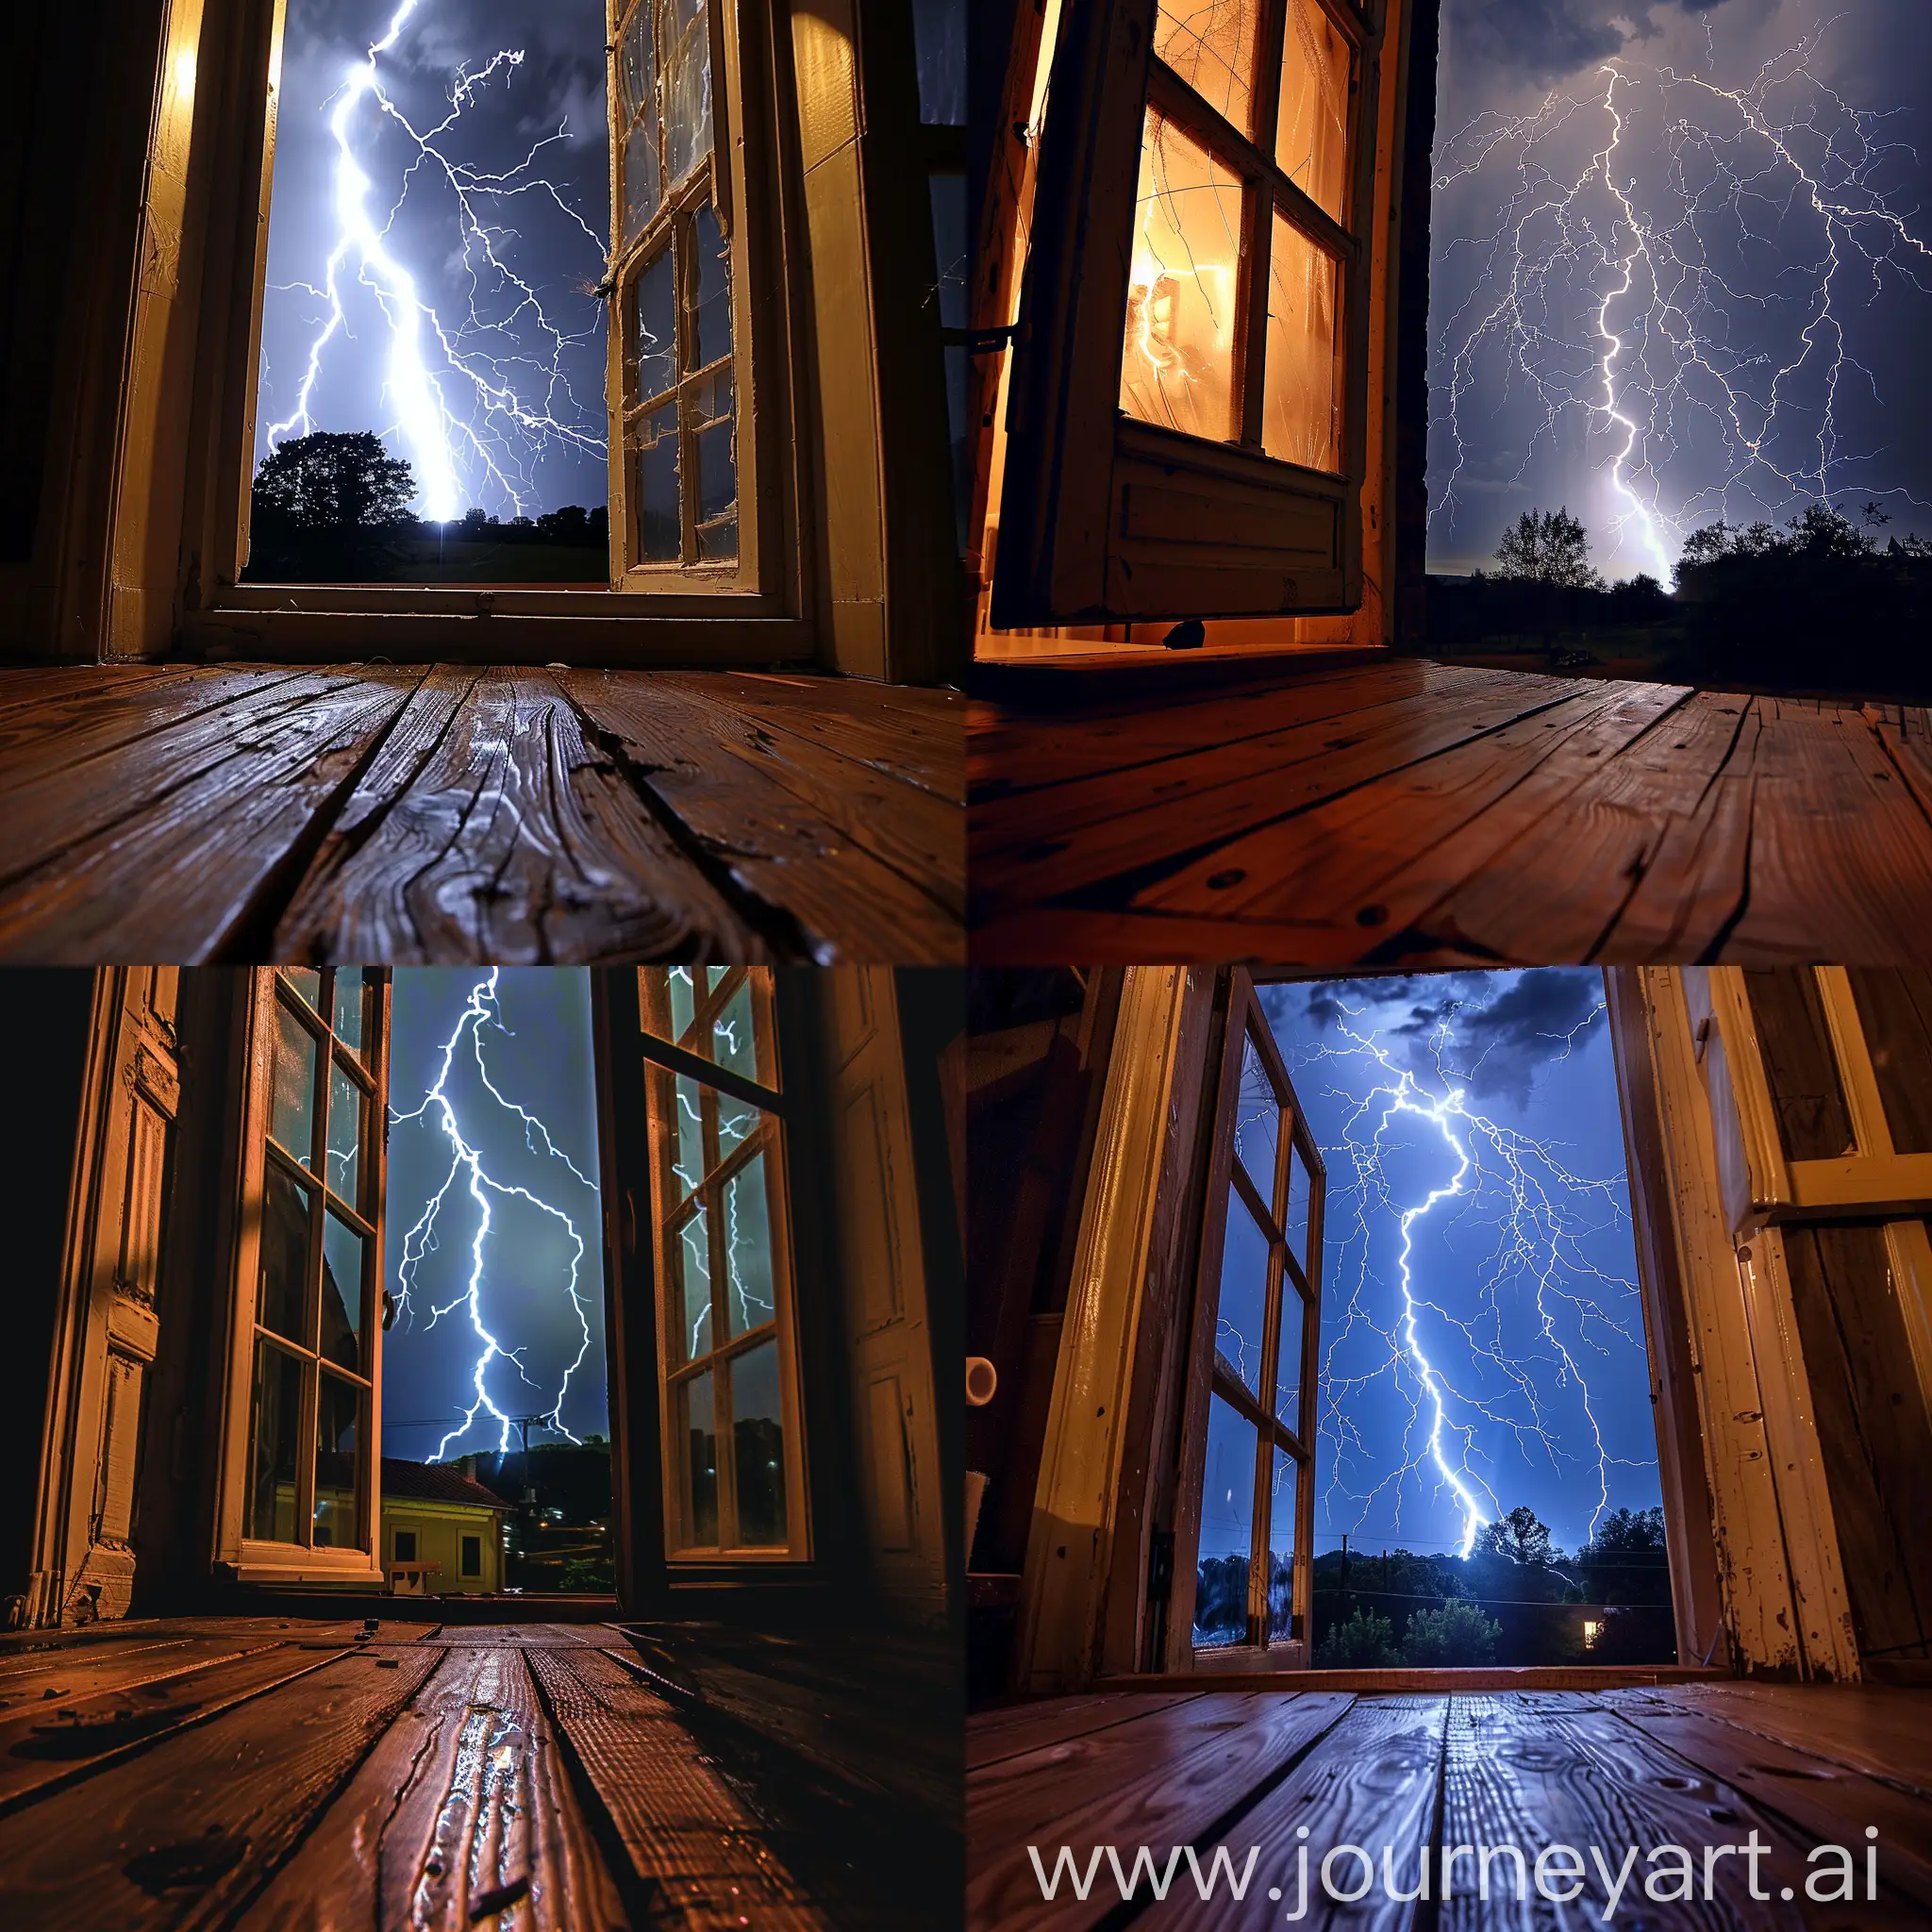 pov from inside an old wooden floor kitchen room looking out a Window during night and seeing a huge lightning impact